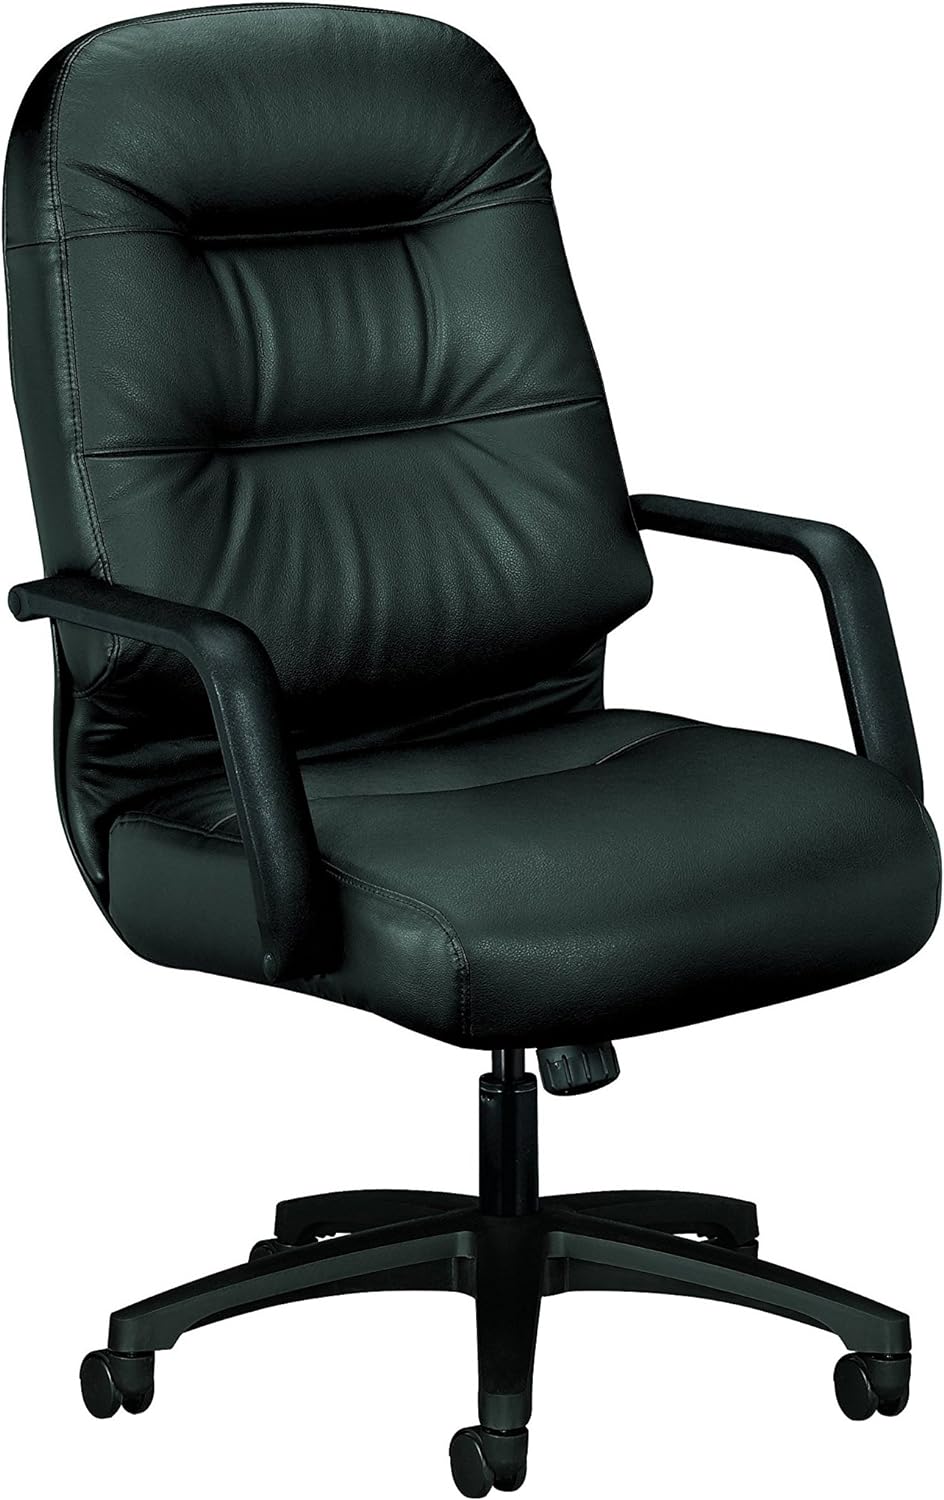 HON Leather Executive Chair - Pillow-Soft Series High-Back Office Chair, Black (H2091)